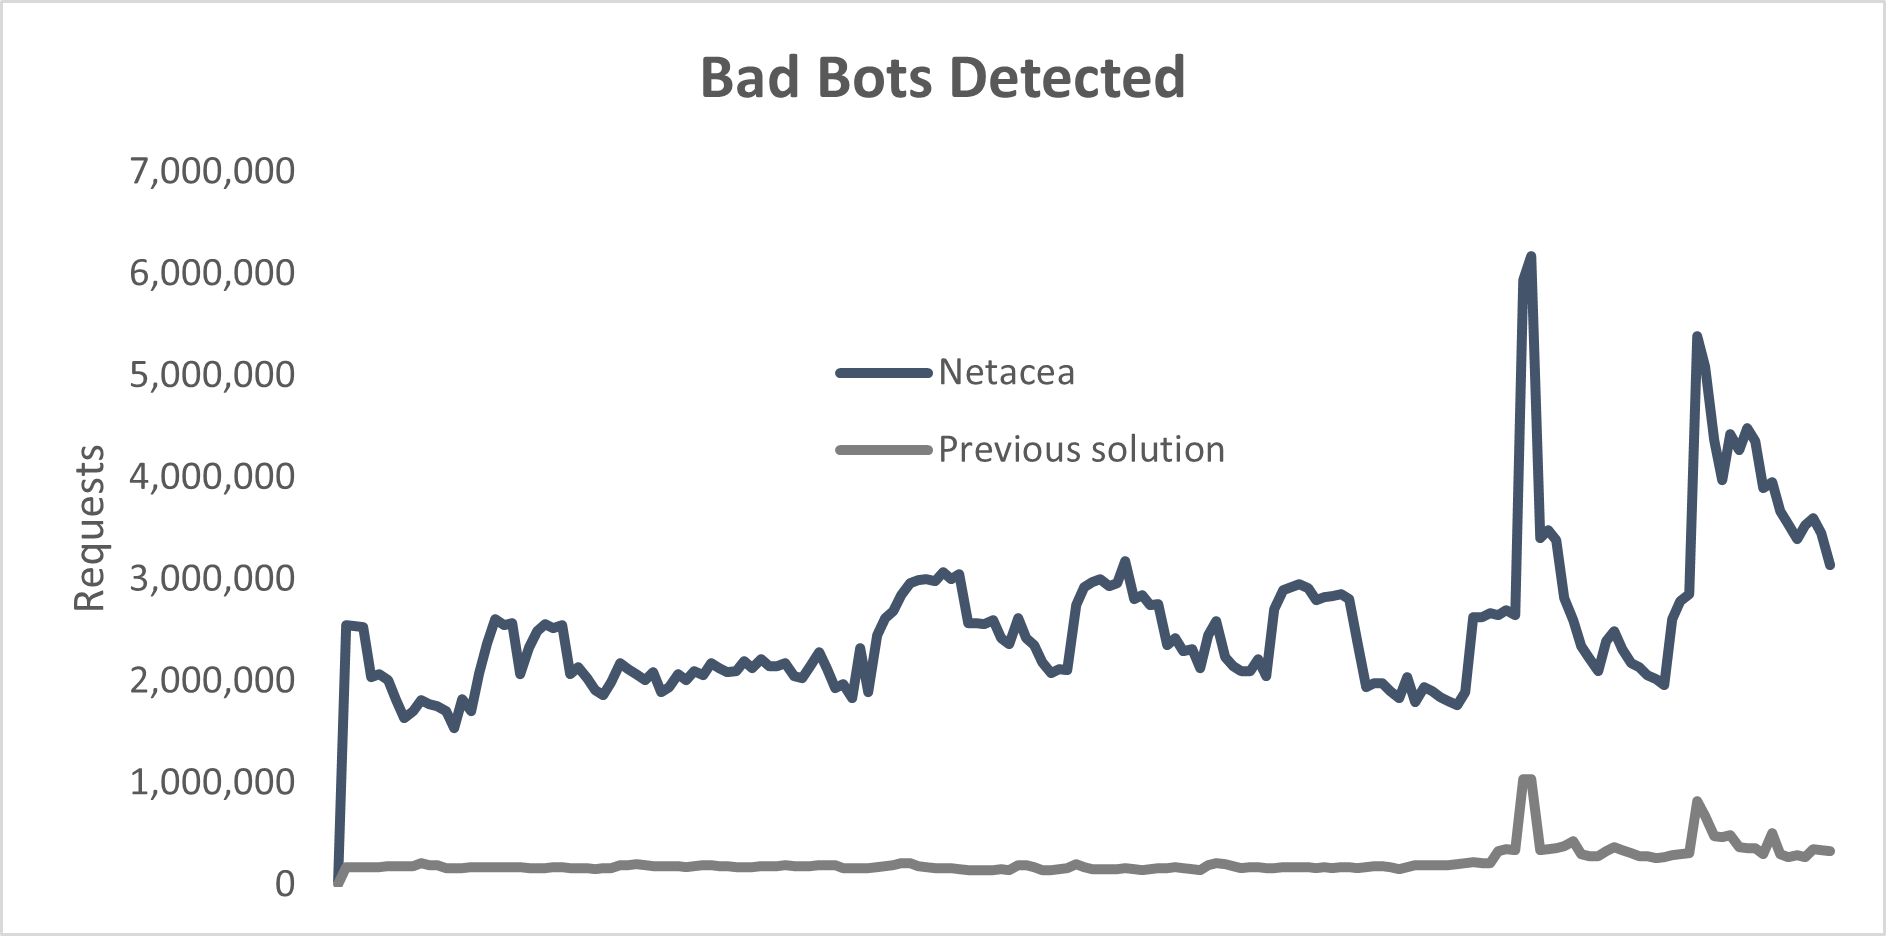 Netacea bot blocking results vs previous solution